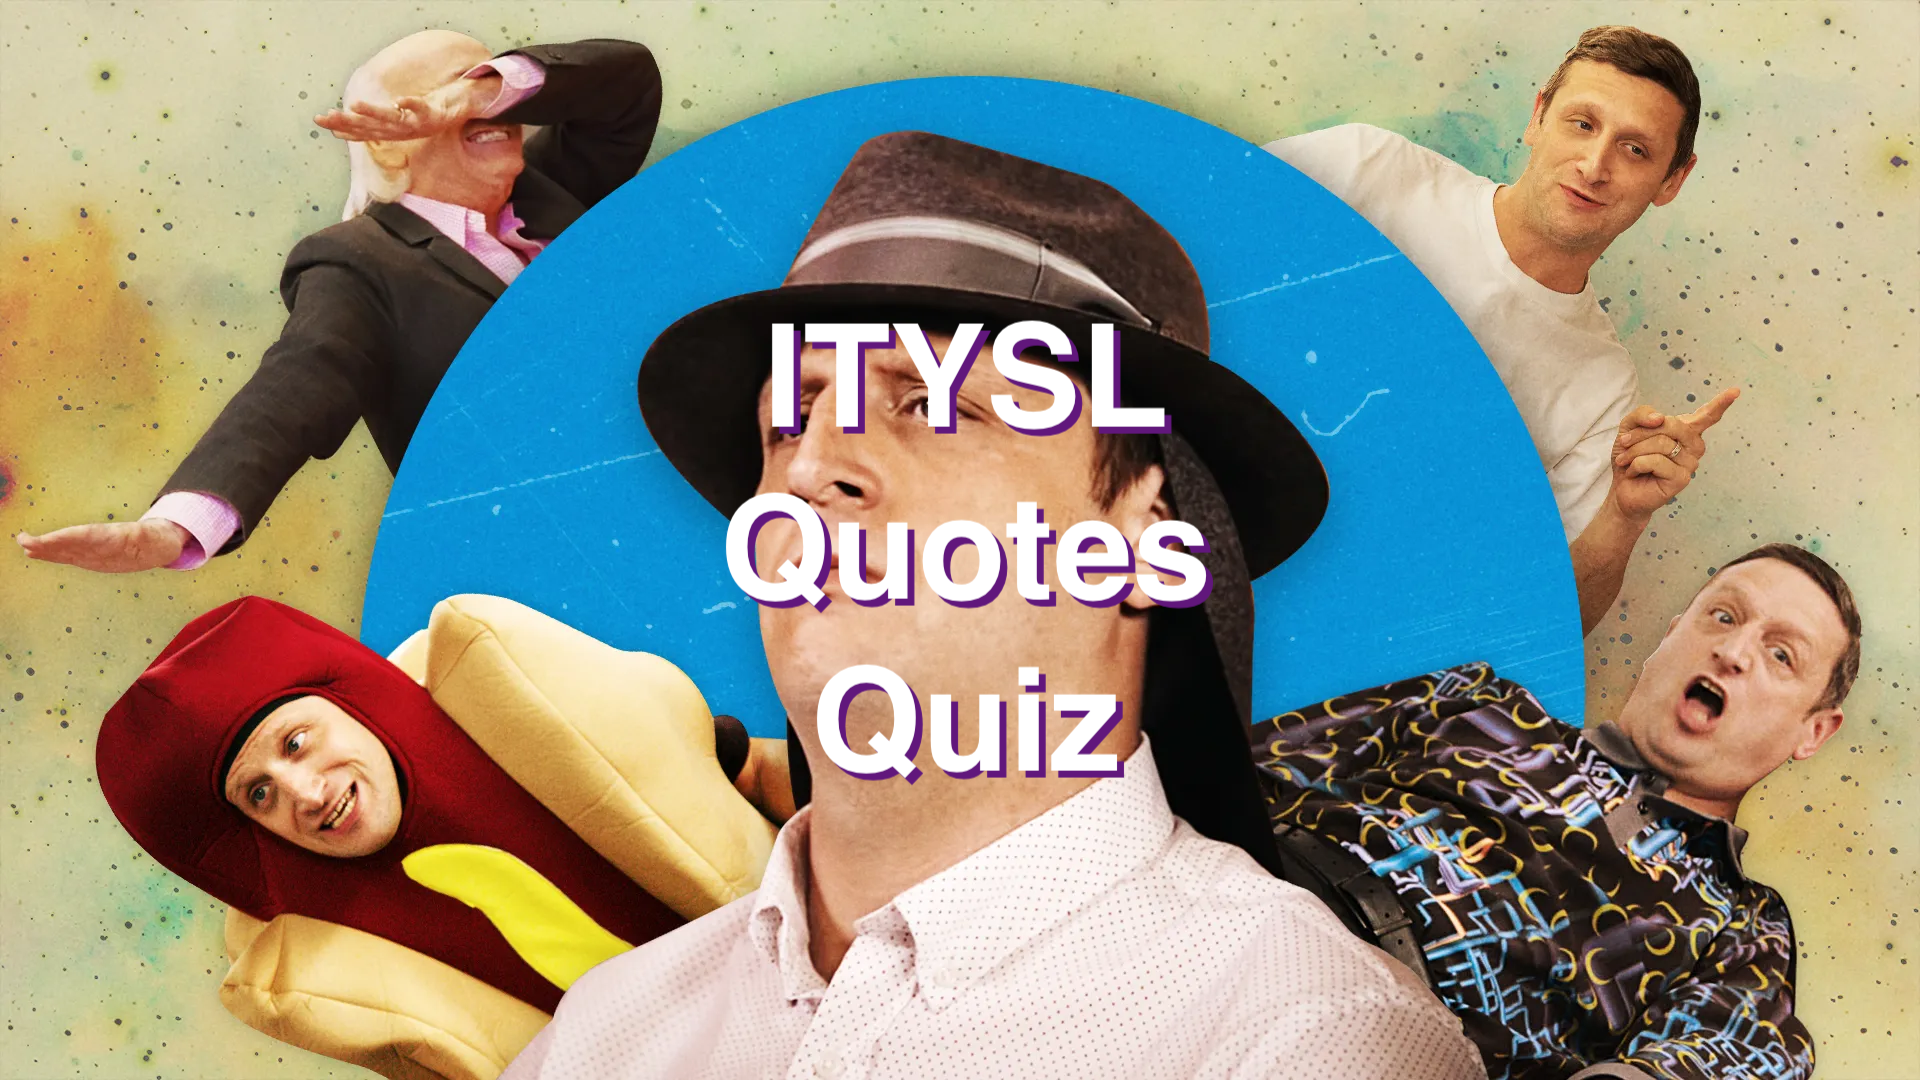 I Think You Should Leave Quotes Quiz (ITYSL quiz)